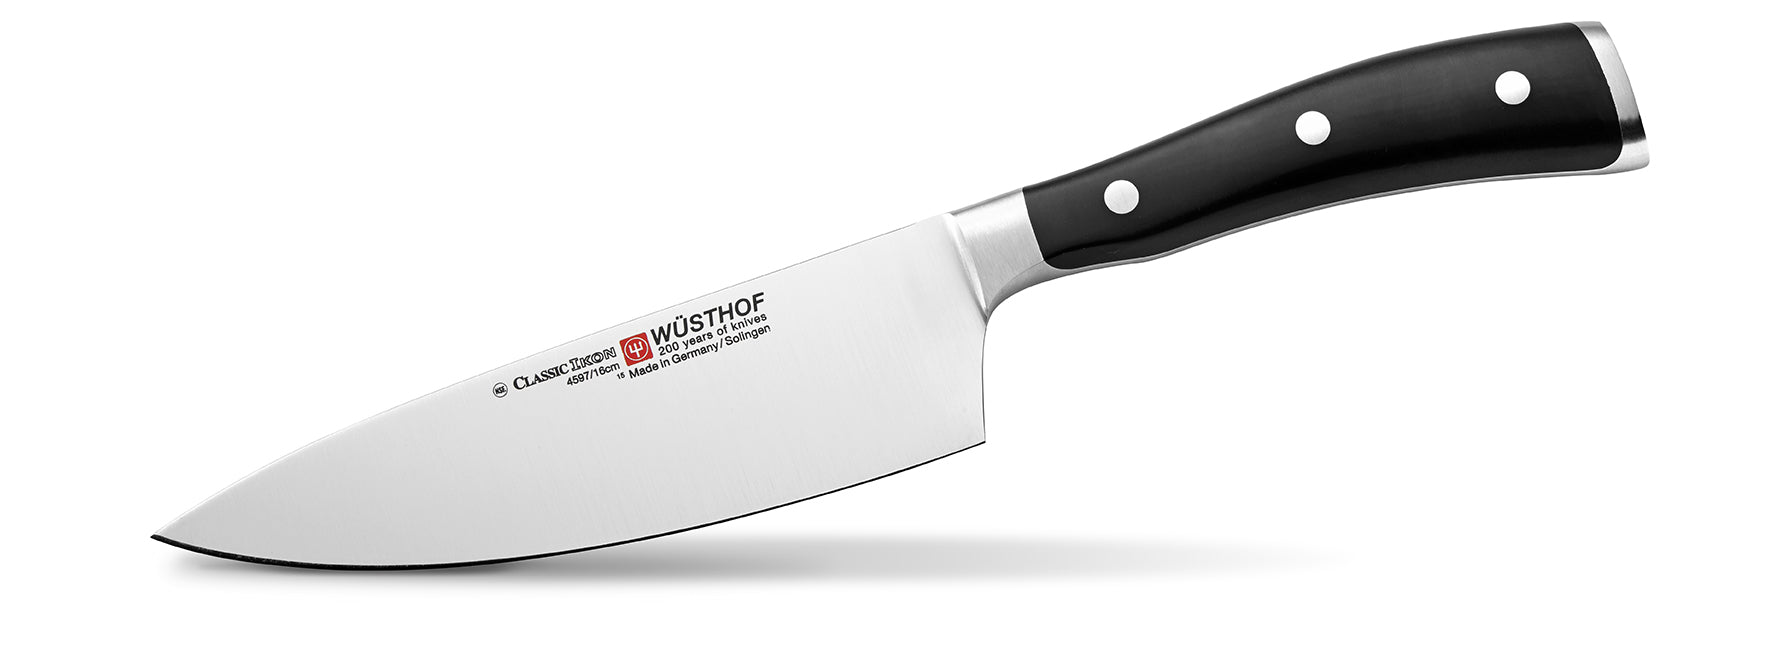 How to Sharpen a Wusthof Brand Kitchen Knife